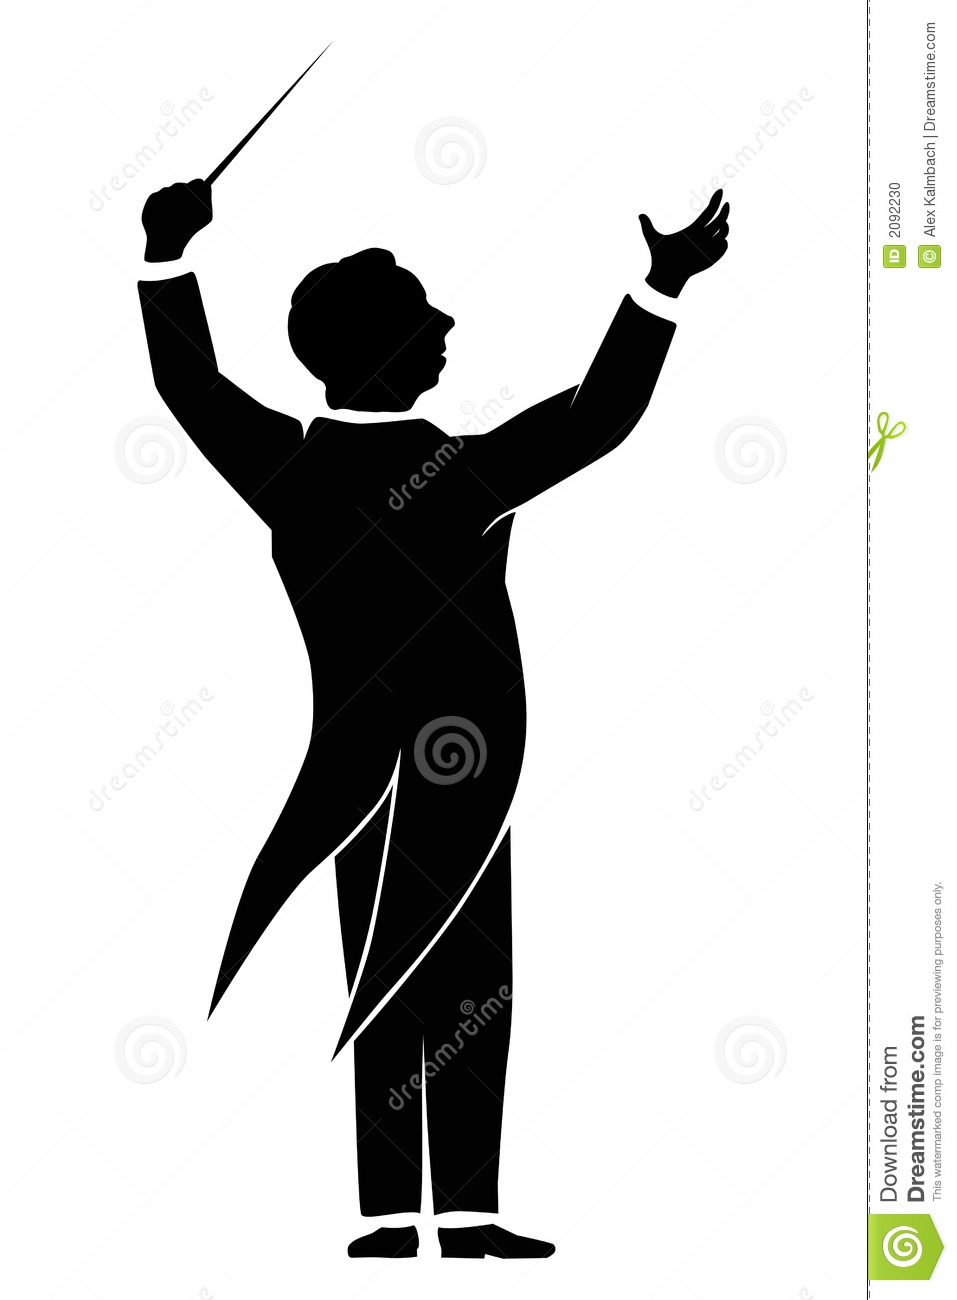 Orchestra Conductor Stock Photo   Image  2092230